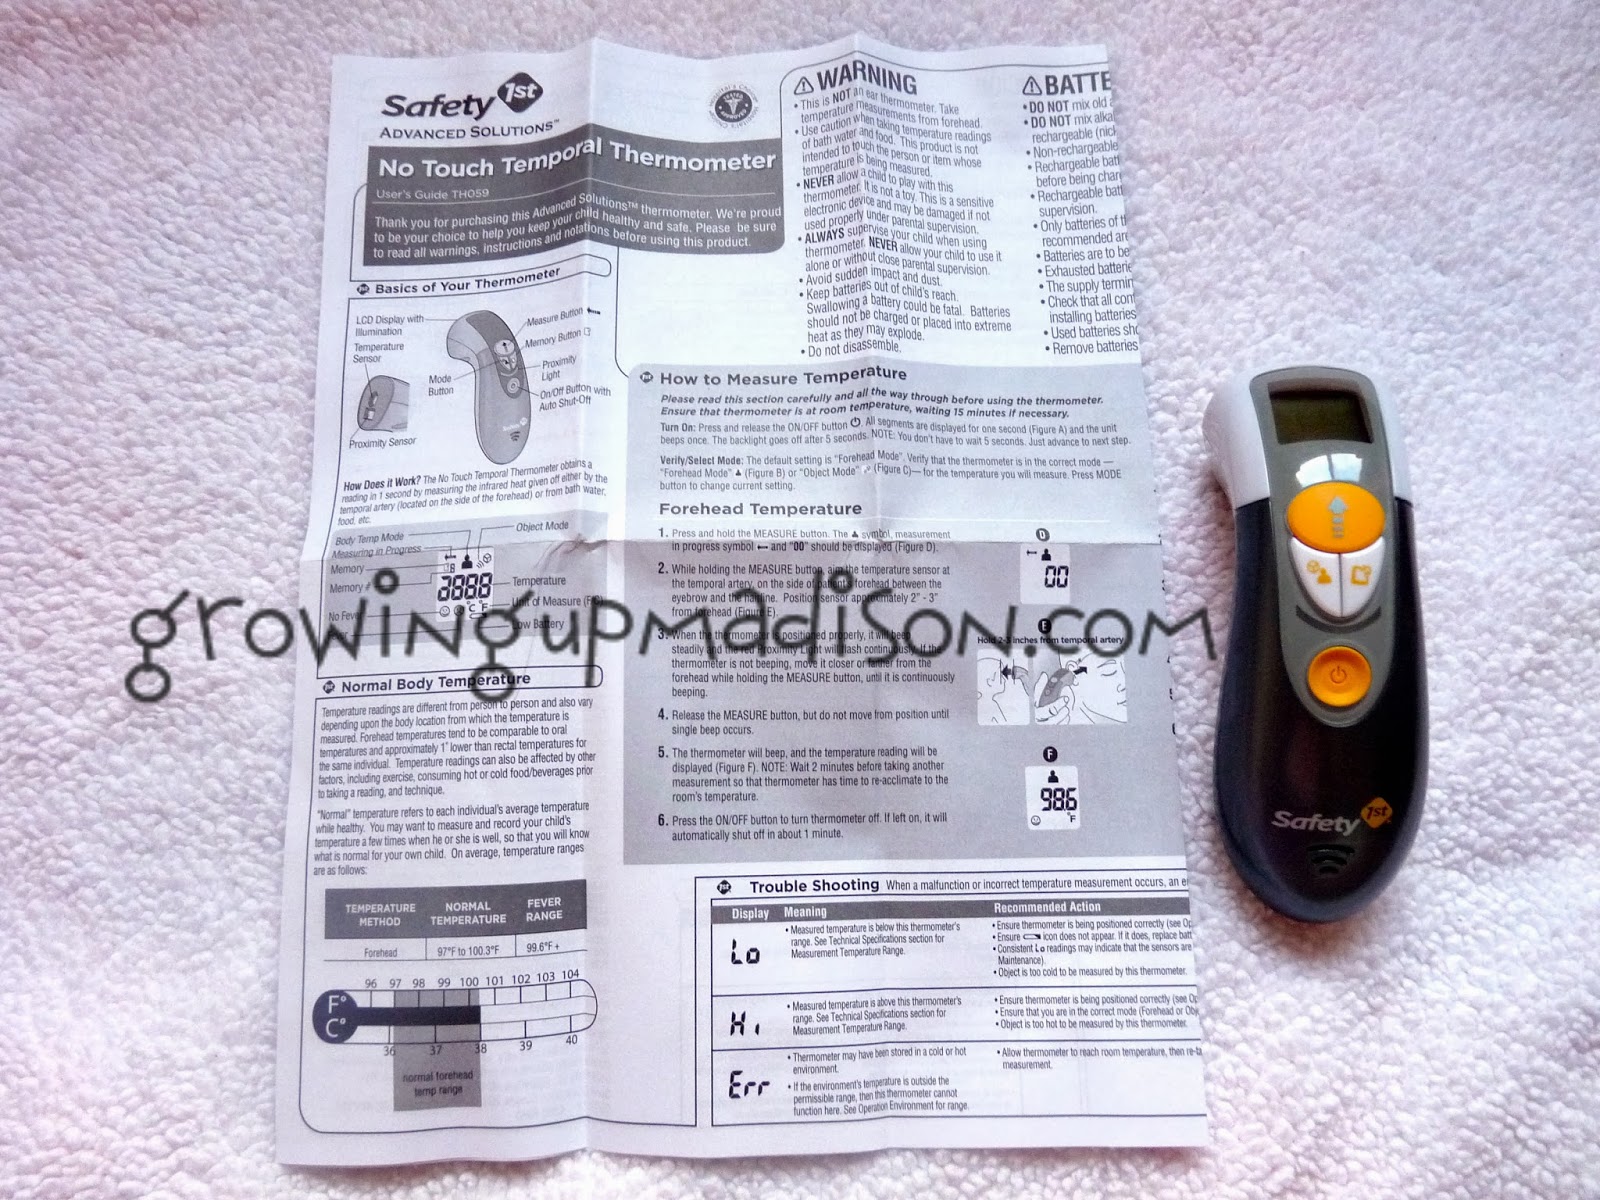 Safety 1st Advanced Solutions No Touch Temporal Thermometer Review and